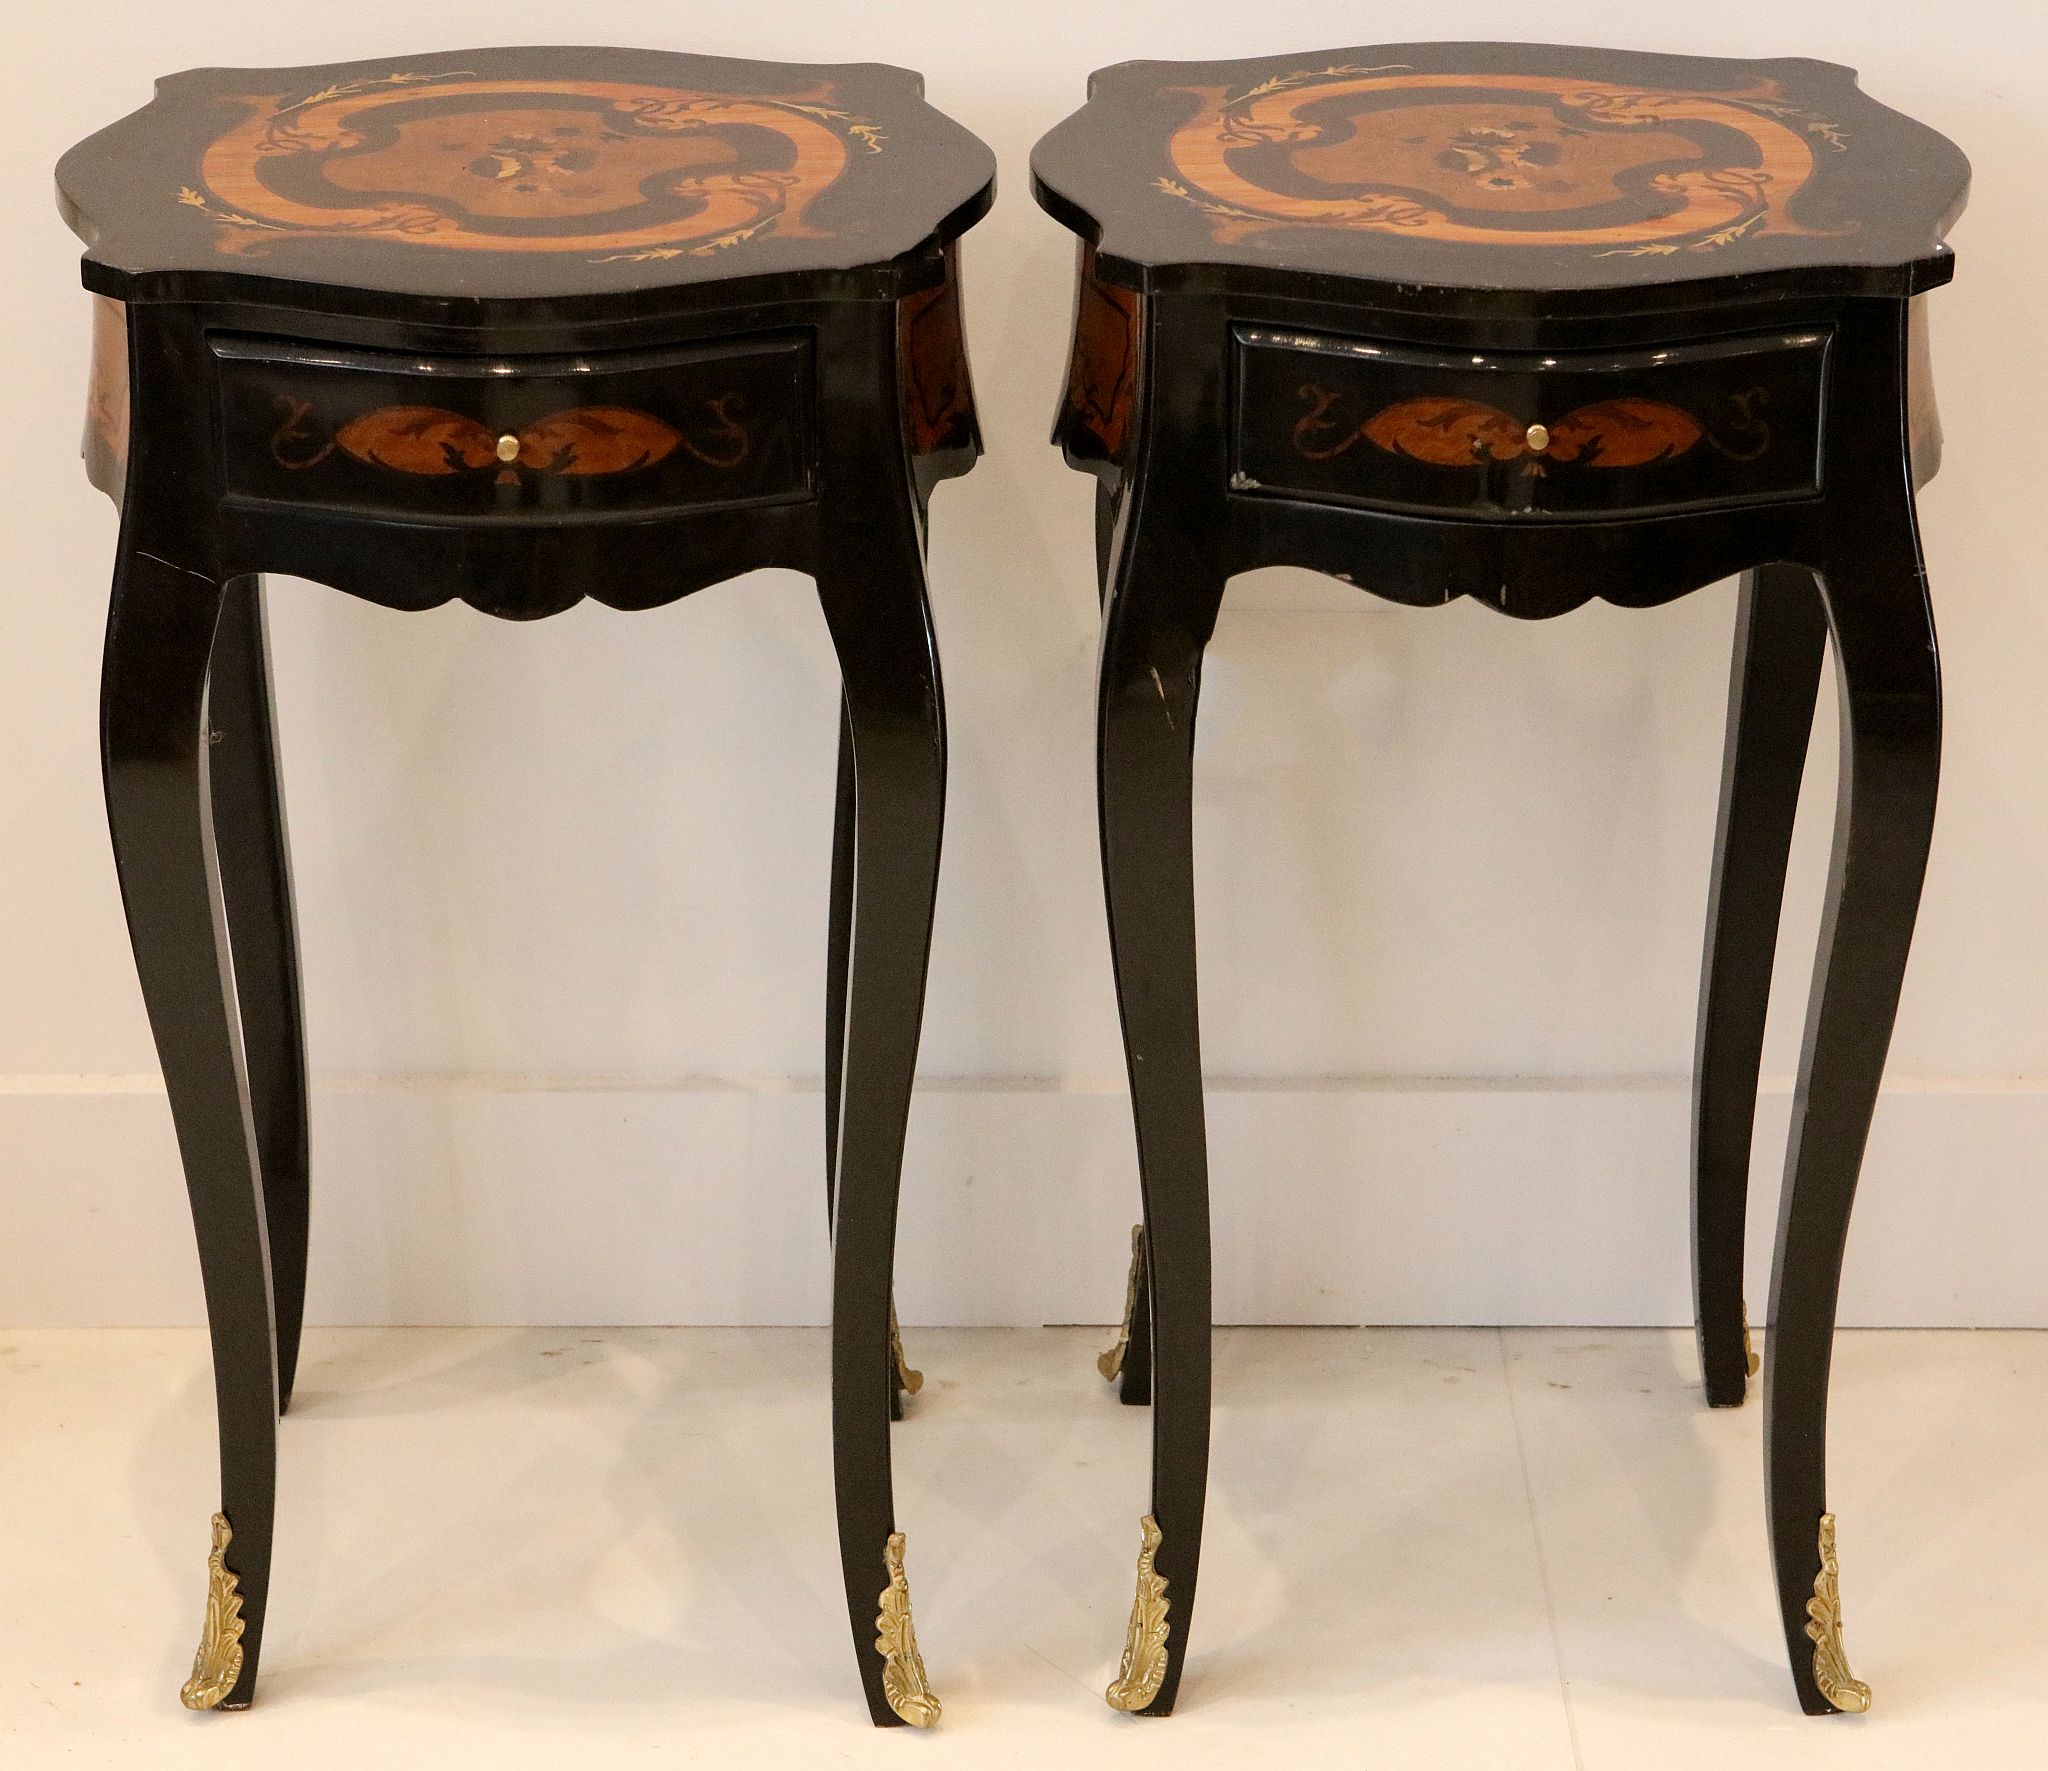 A pair of lamp tables in Italian style, floral and acanthus decoration, single drawer, tapering